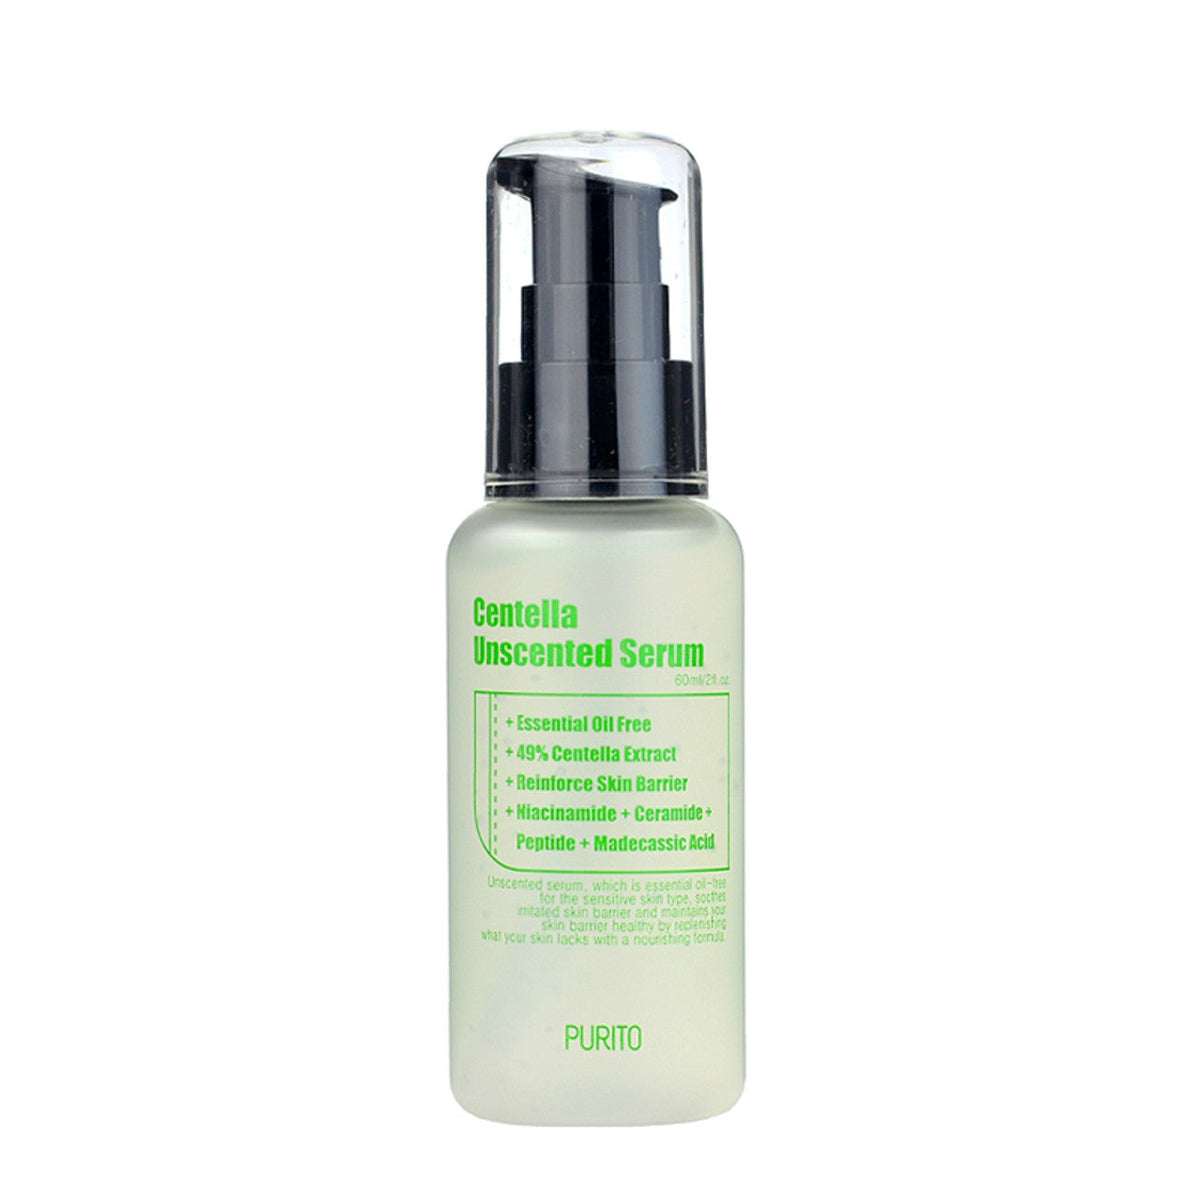 Natural day and night serum by Purito Centella | Supports natural collagen synthesis and regenerates skin | Vegan cruel-free serum 60ml